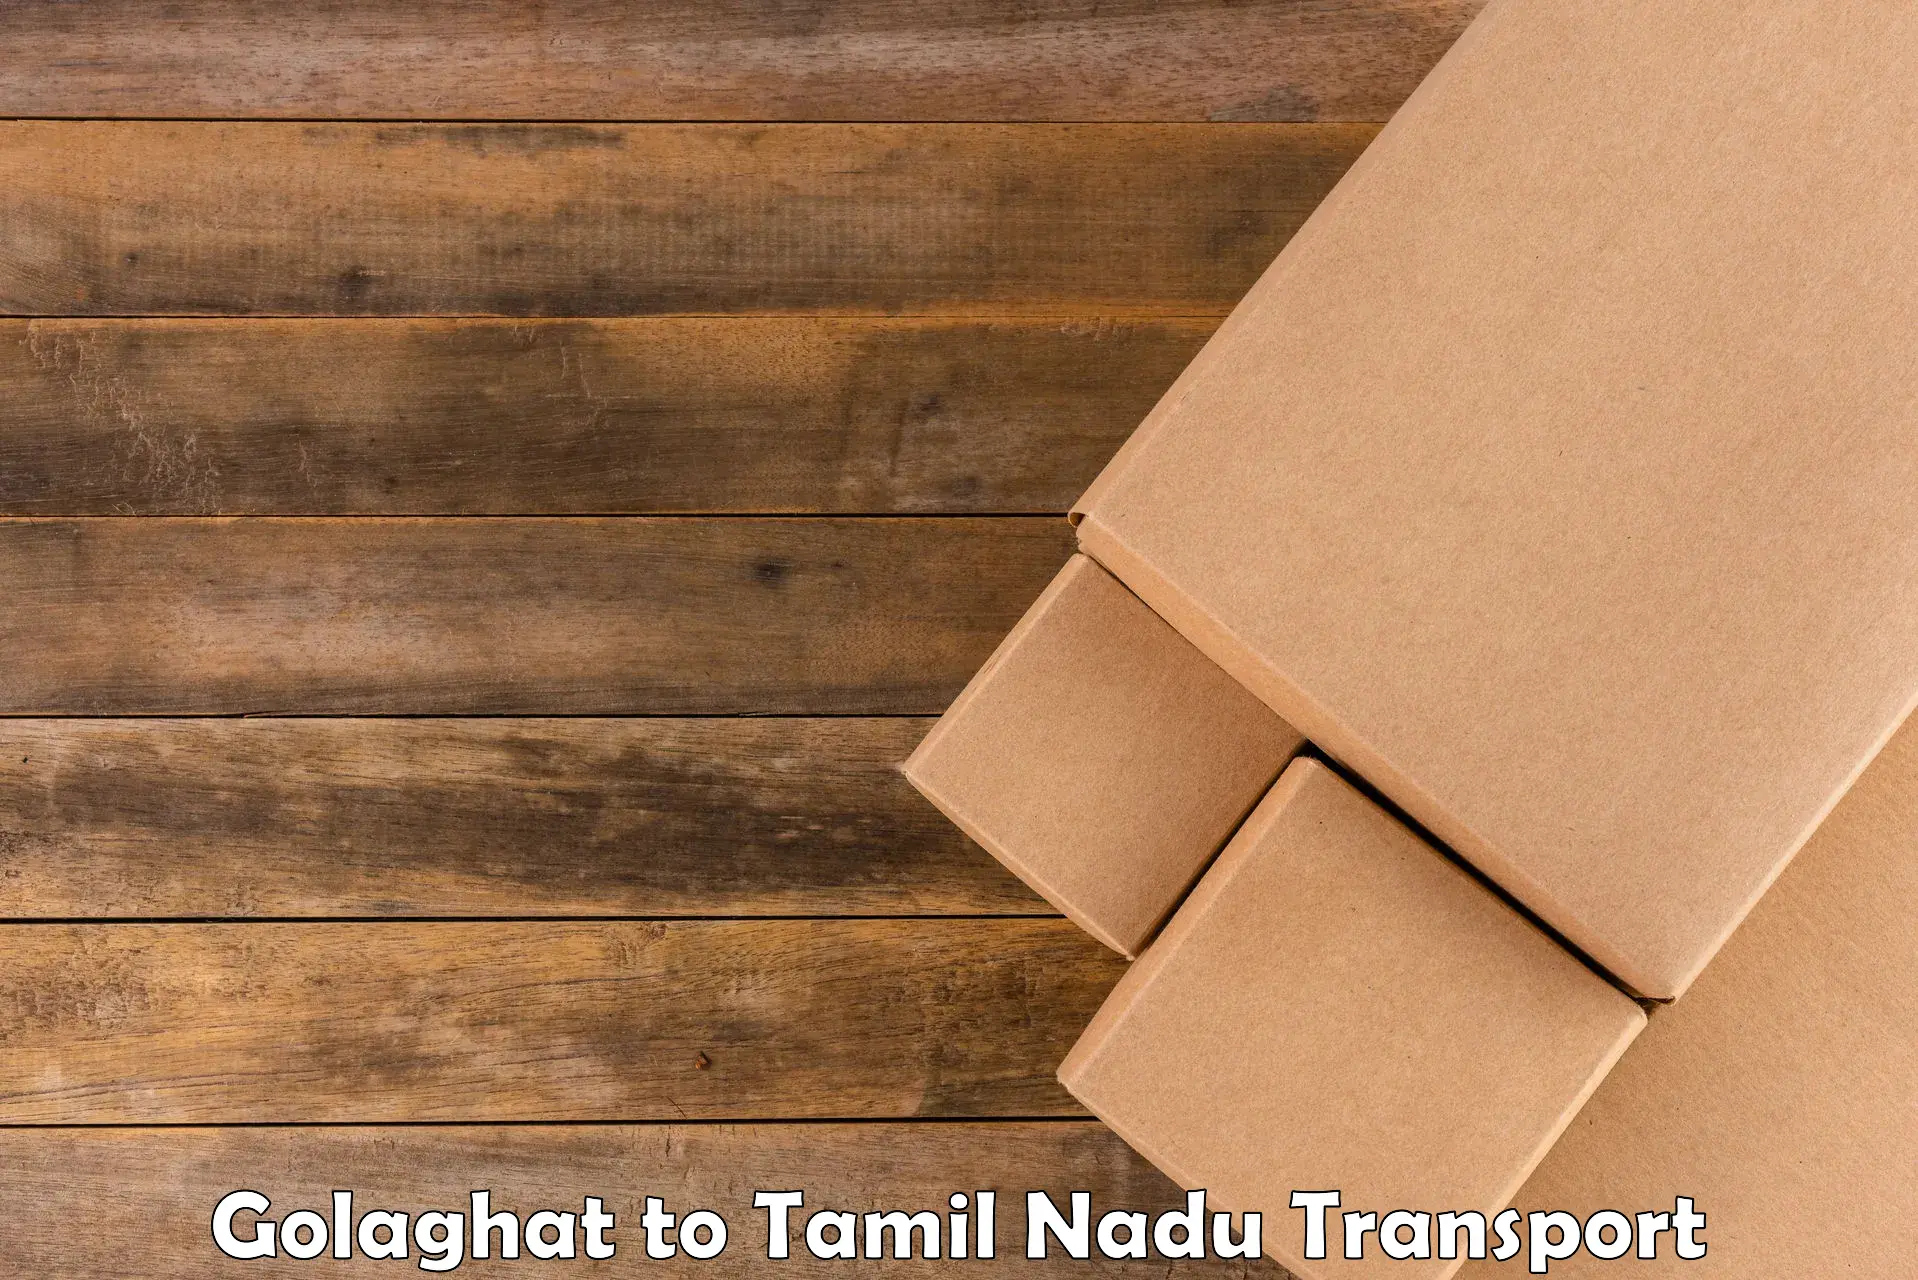 Container transport service in Golaghat to Chennai Port